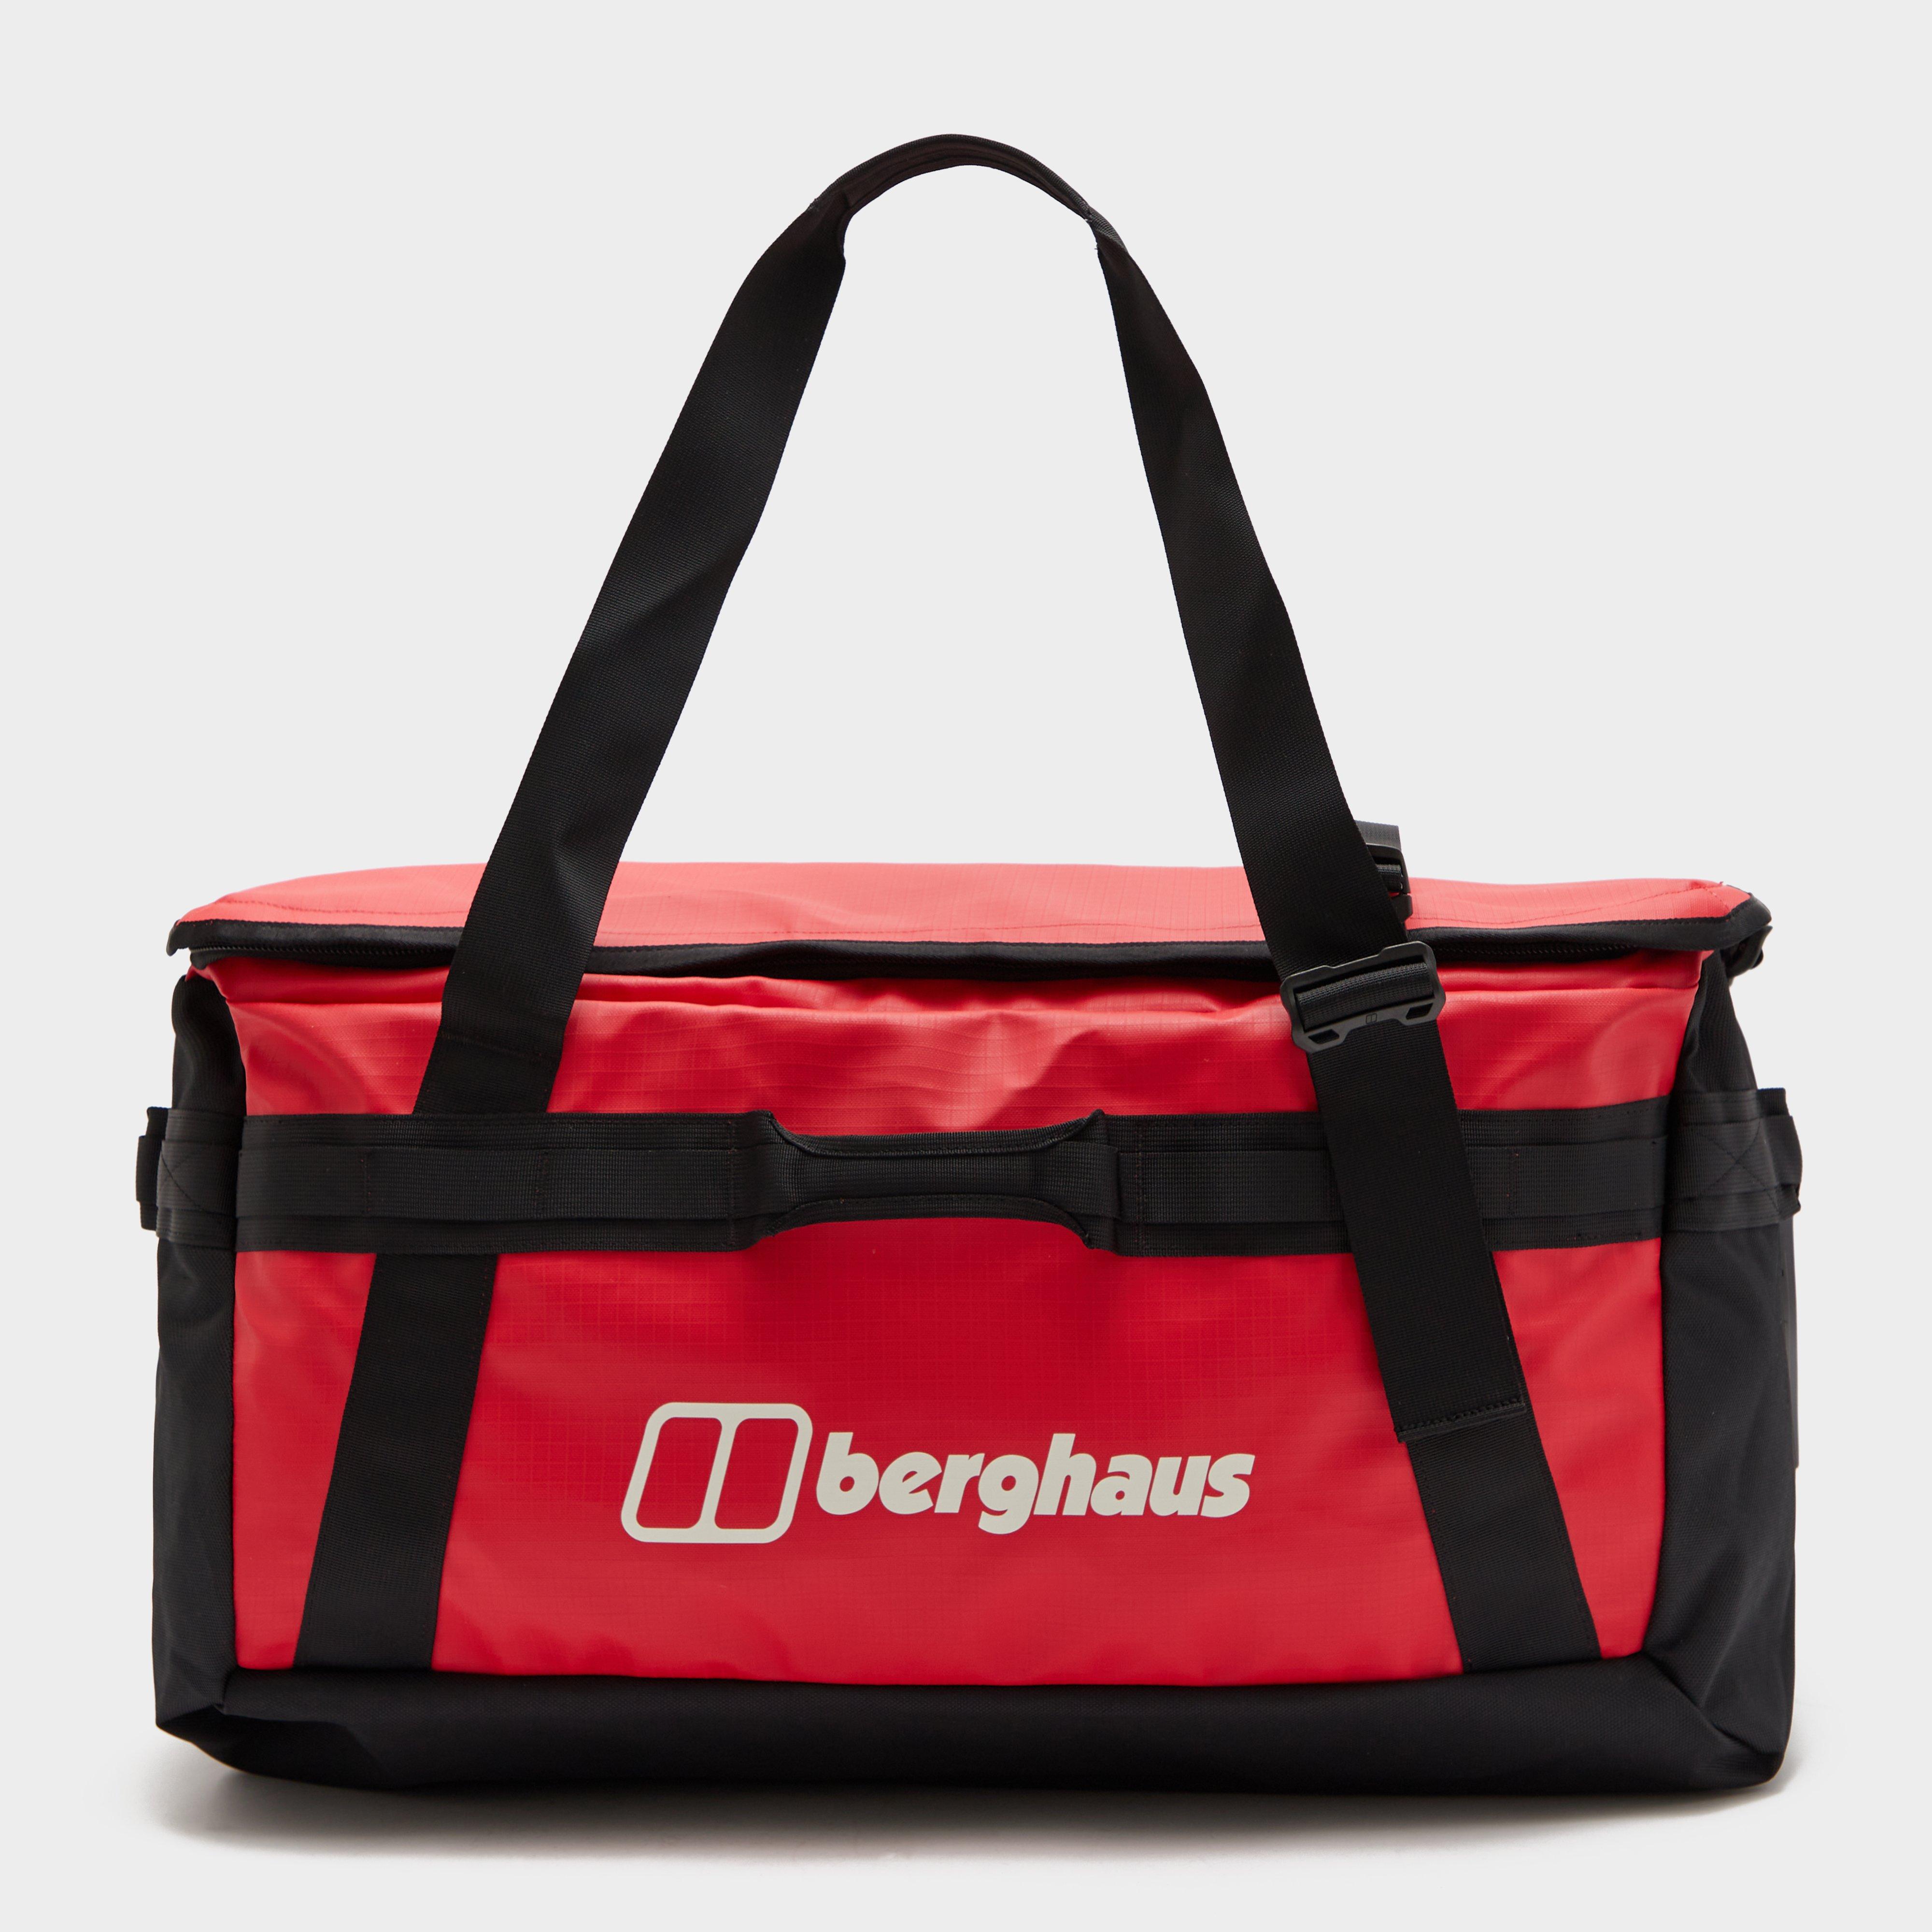  Berghaus 100L Holdall, Red